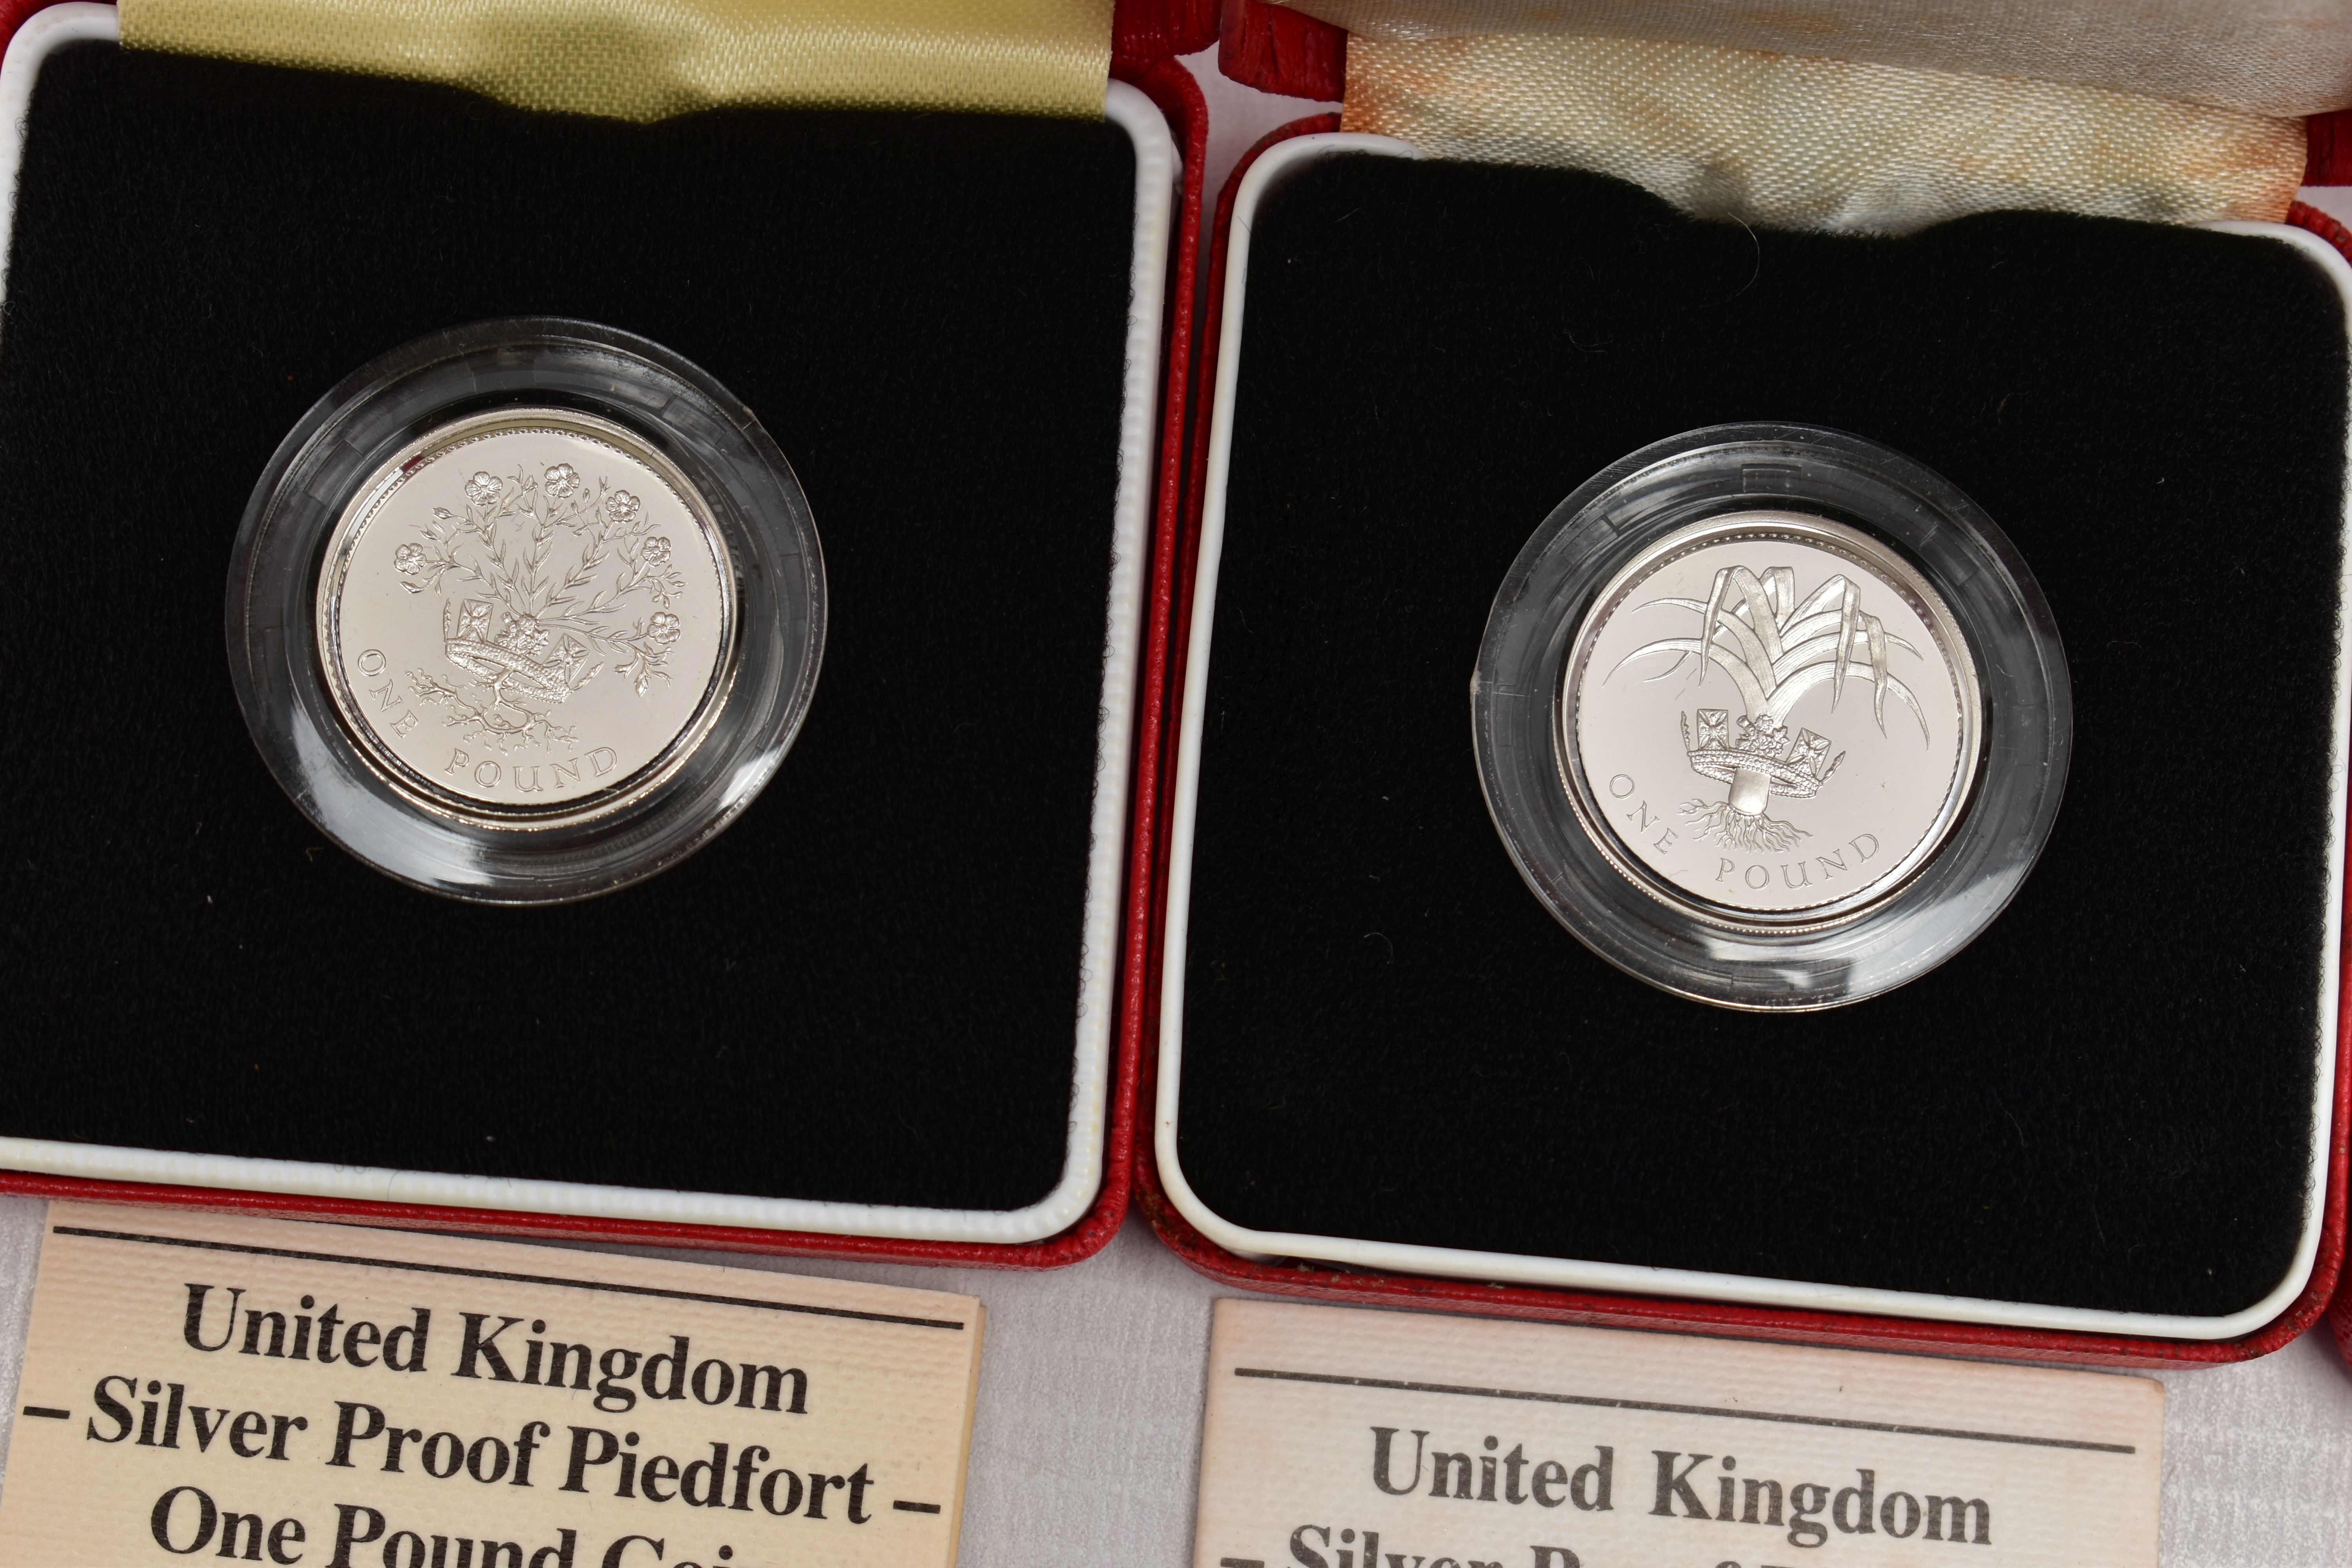 ROYAL MINT BOXED SILVER PROOF PIEDFORT ONE POUND COINS 1984,1985,1986 all in Royal Mint cases with - Image 2 of 3